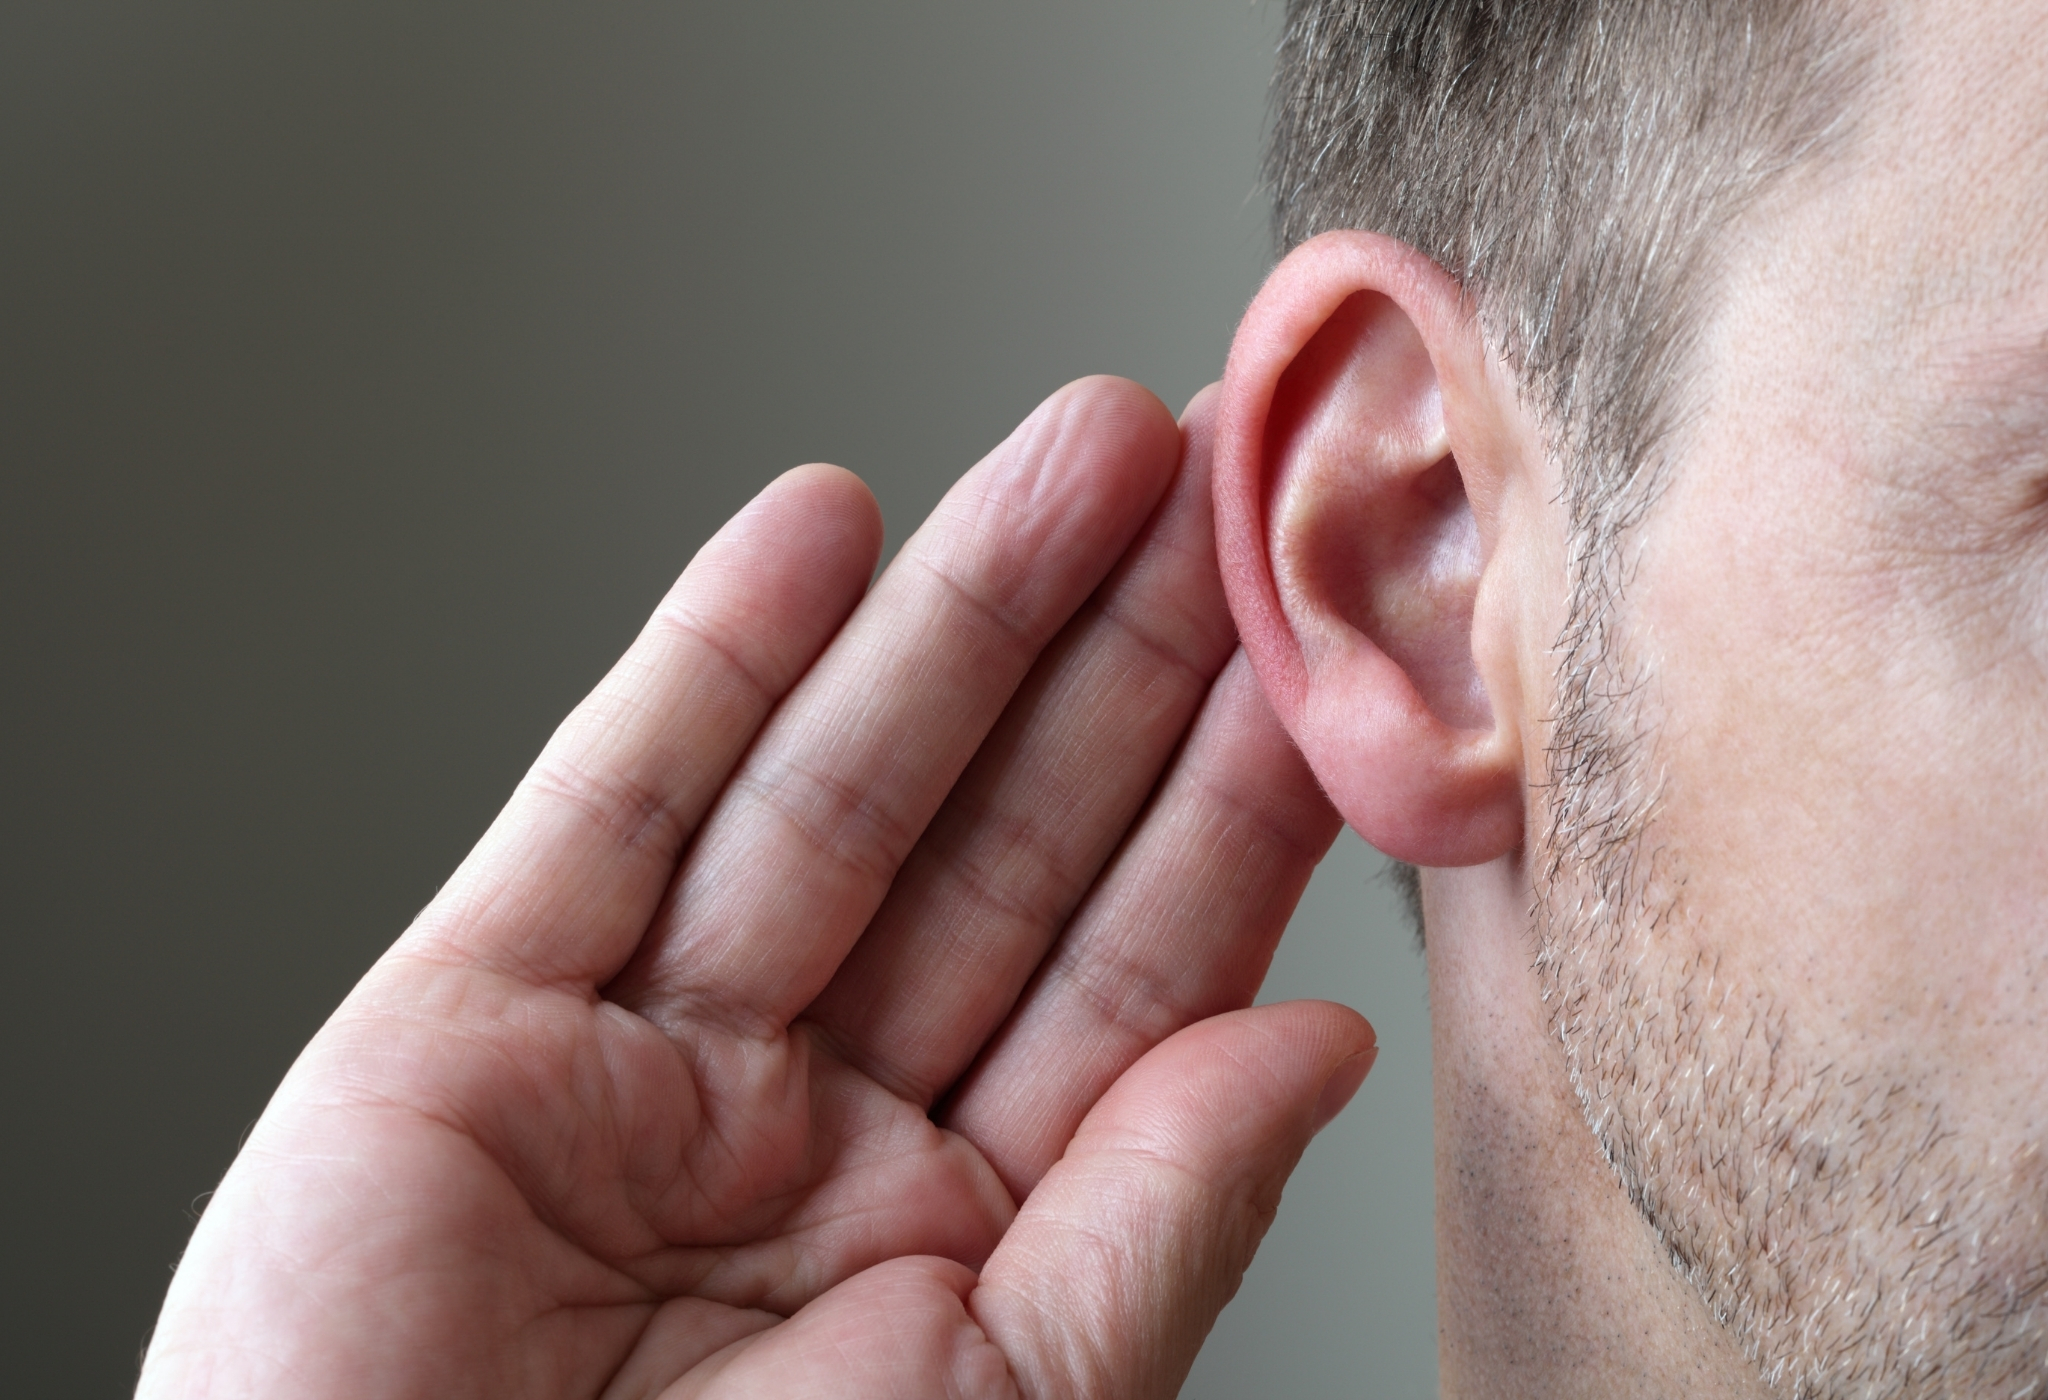 a man attempting to listen by cupping his ear with his hand turn offs for women (habits that are turn offs for women)